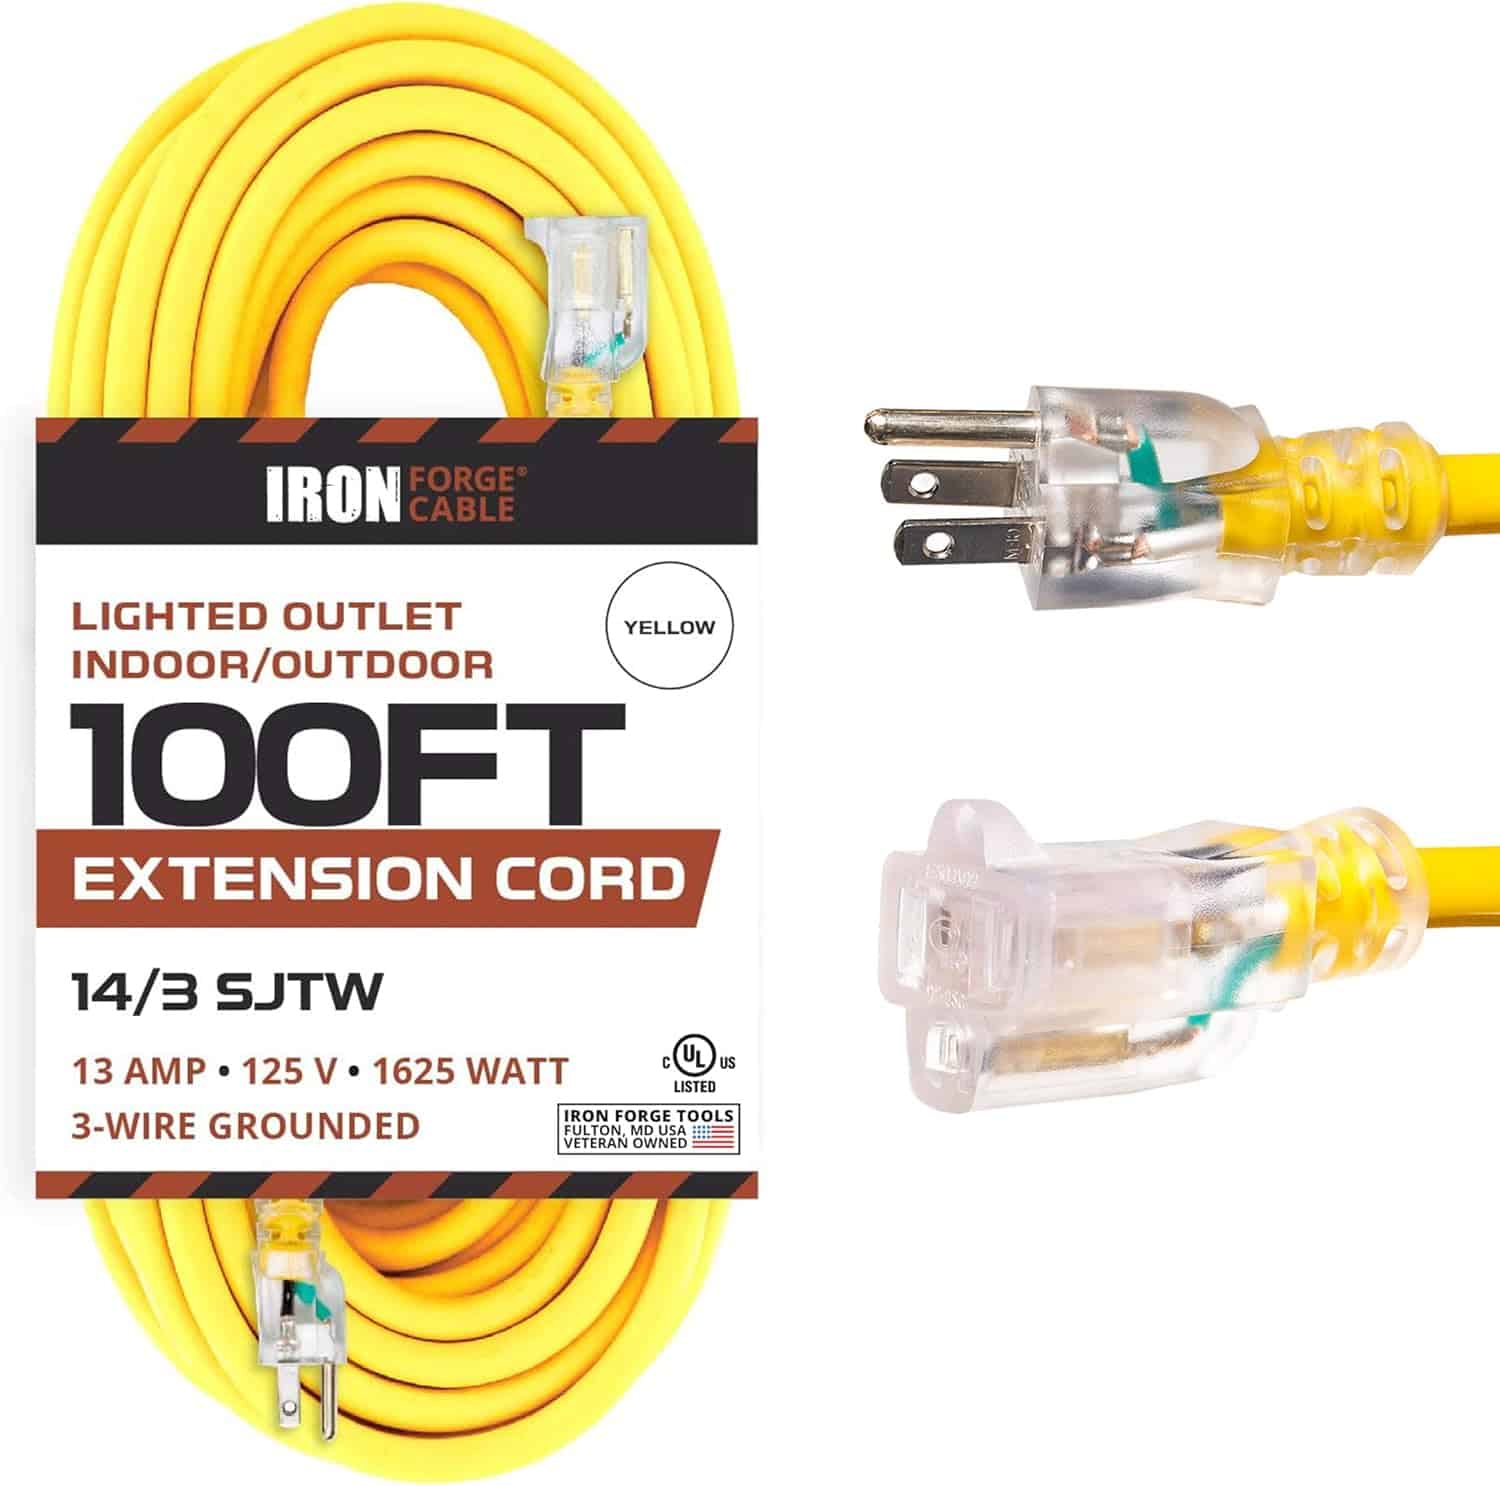 Iron Forge Cable 14 Gauge Extension Cord 100 Ft, Appliance Heavy Duty Extension Cord 100 Foot 3 Prong Lighted Plug, 14 3 Weatherproof Yellow Outdoor Electrical Cable SJTW, 13 Amp, US Veteran Owned 1